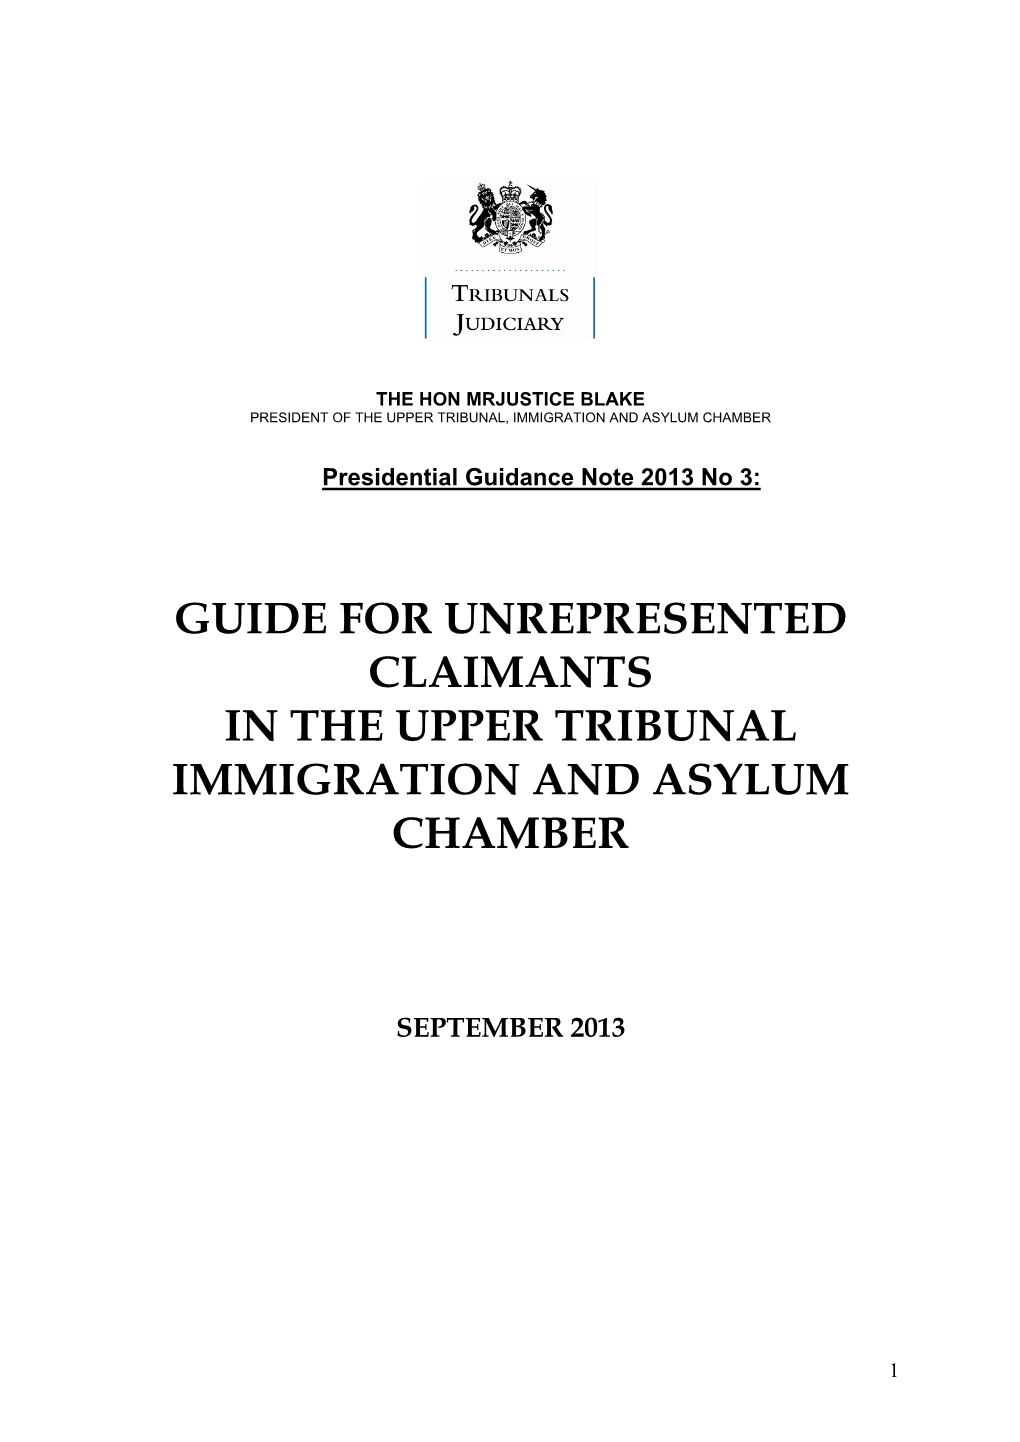 Guide for Unrepresented Claimants in Upper Tribunal Immigration And